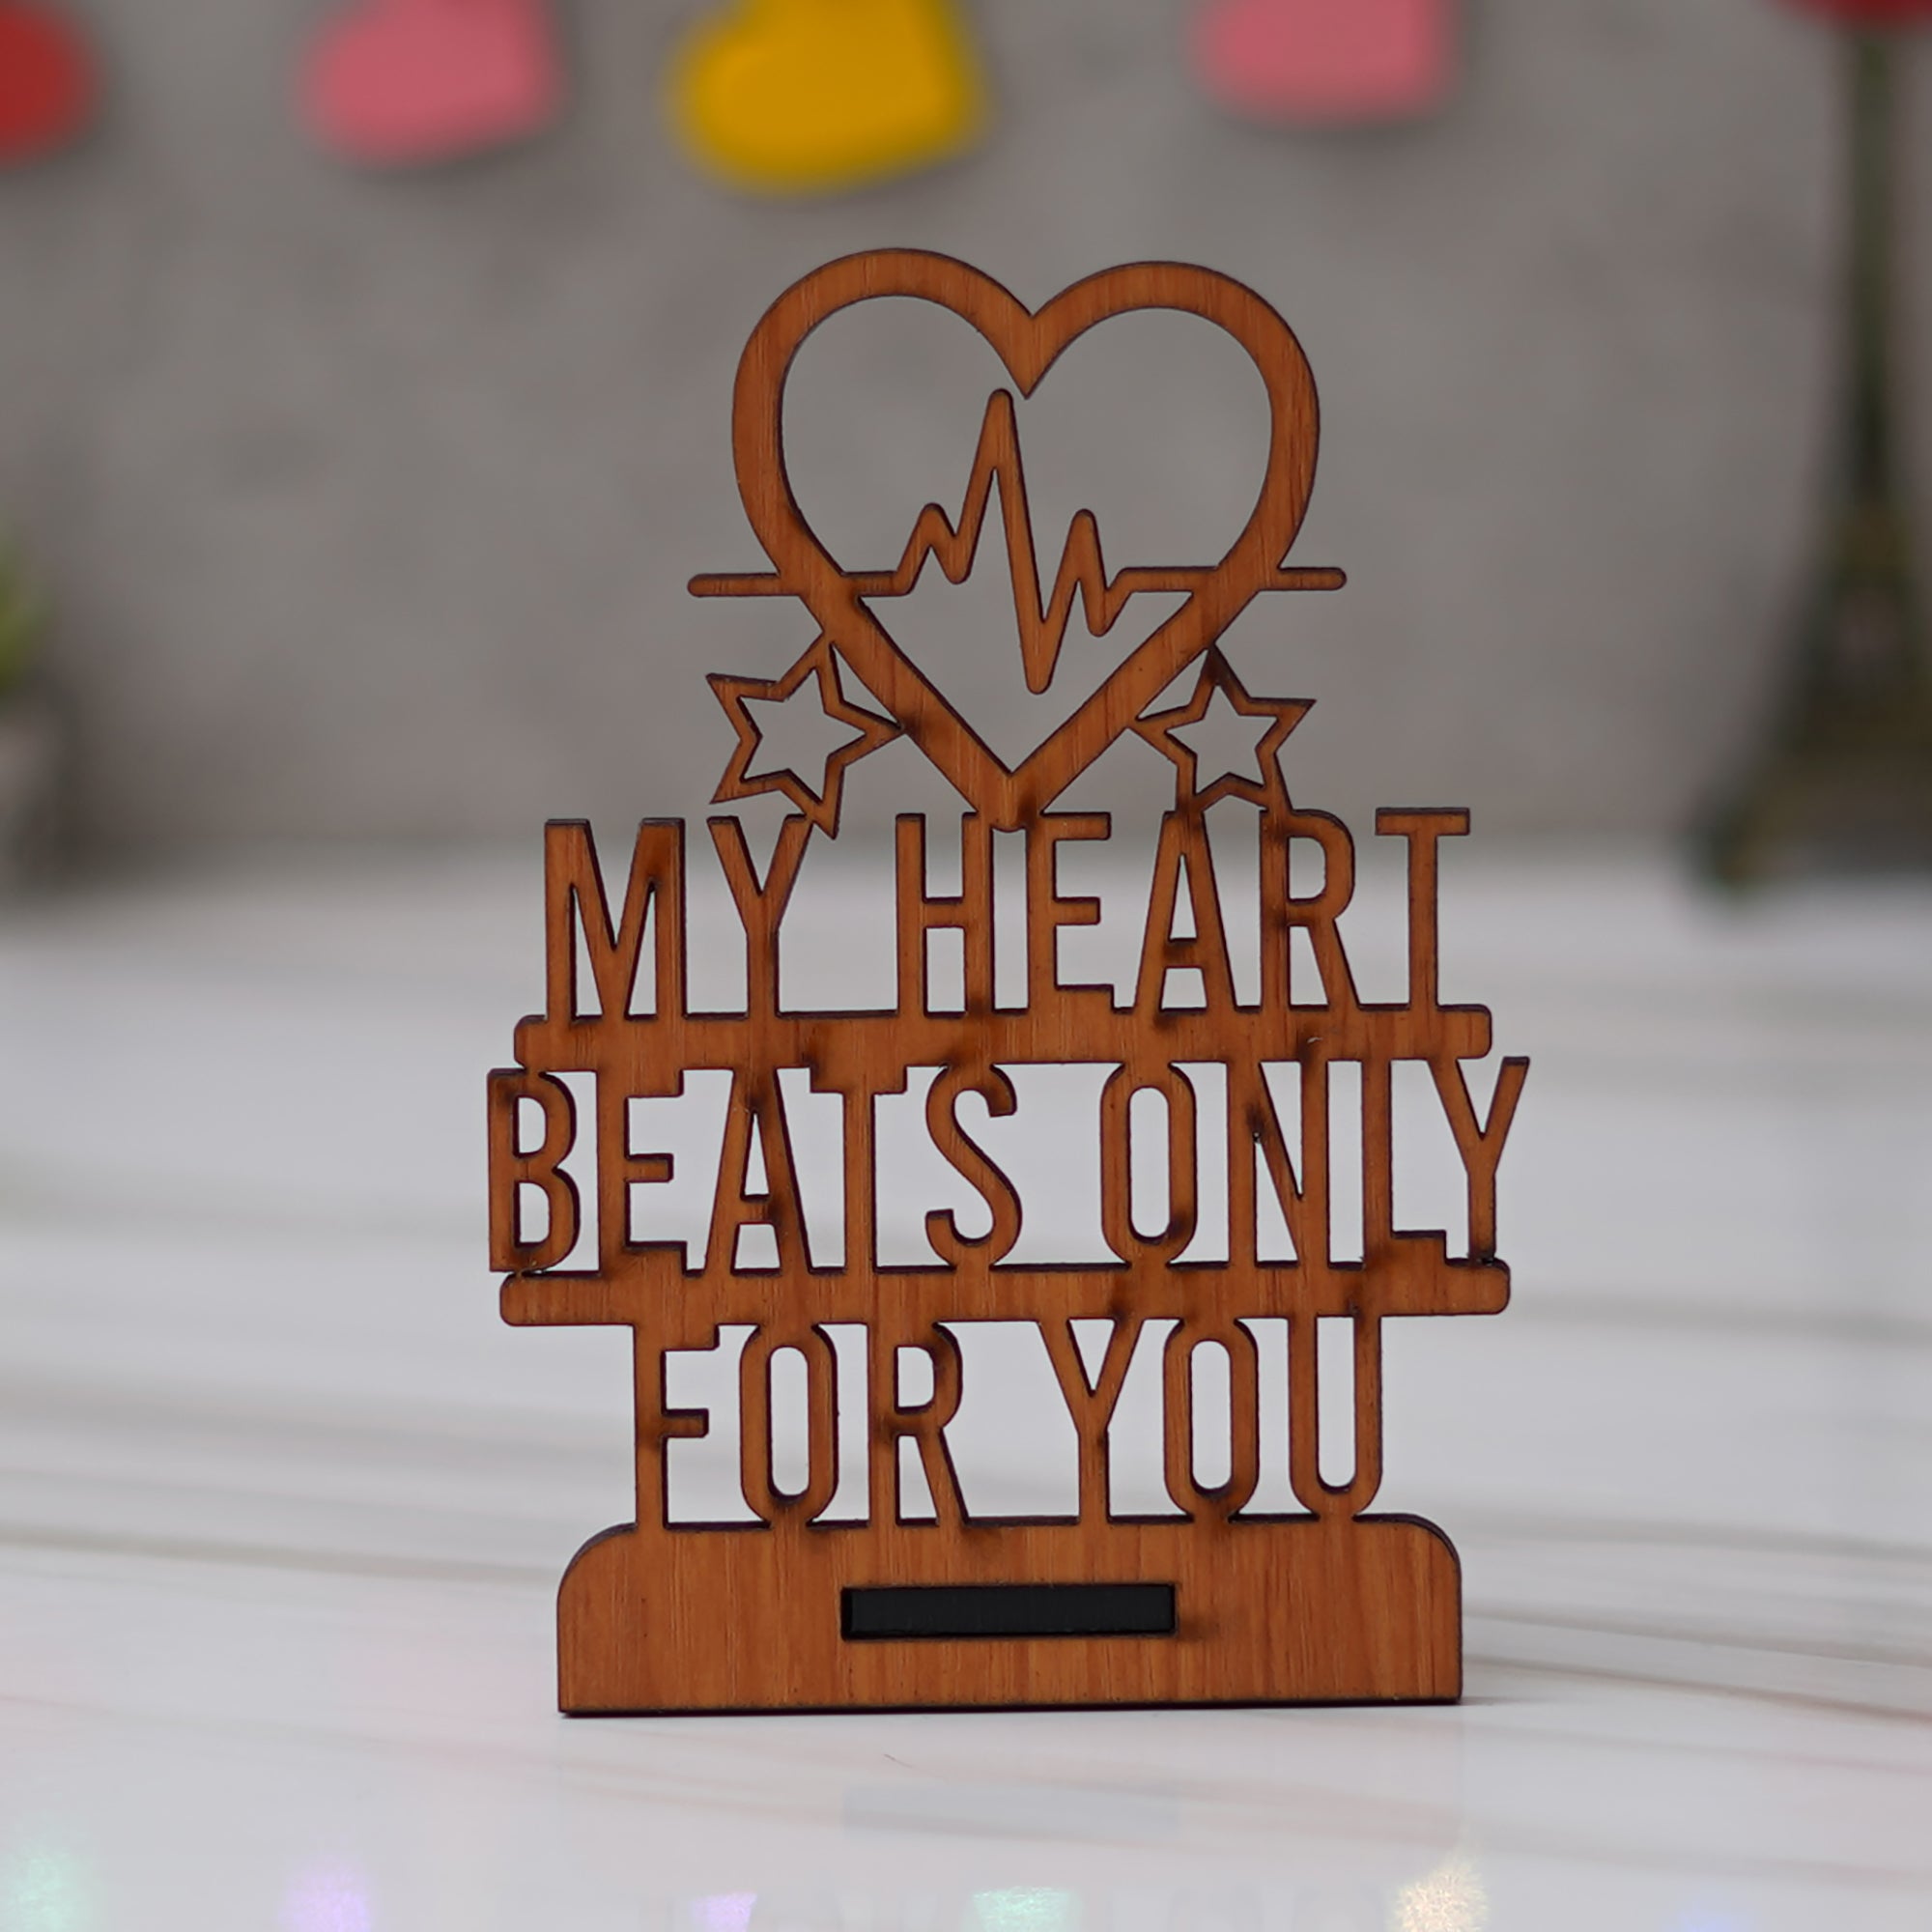 Valentine Combo of Pack of 8 Love Gift Cards, "My Heart Beats Only For You" Wooden Showpiece With Stand, Heart Shaped Gift Box Set with White Teddy and Red Roses 3